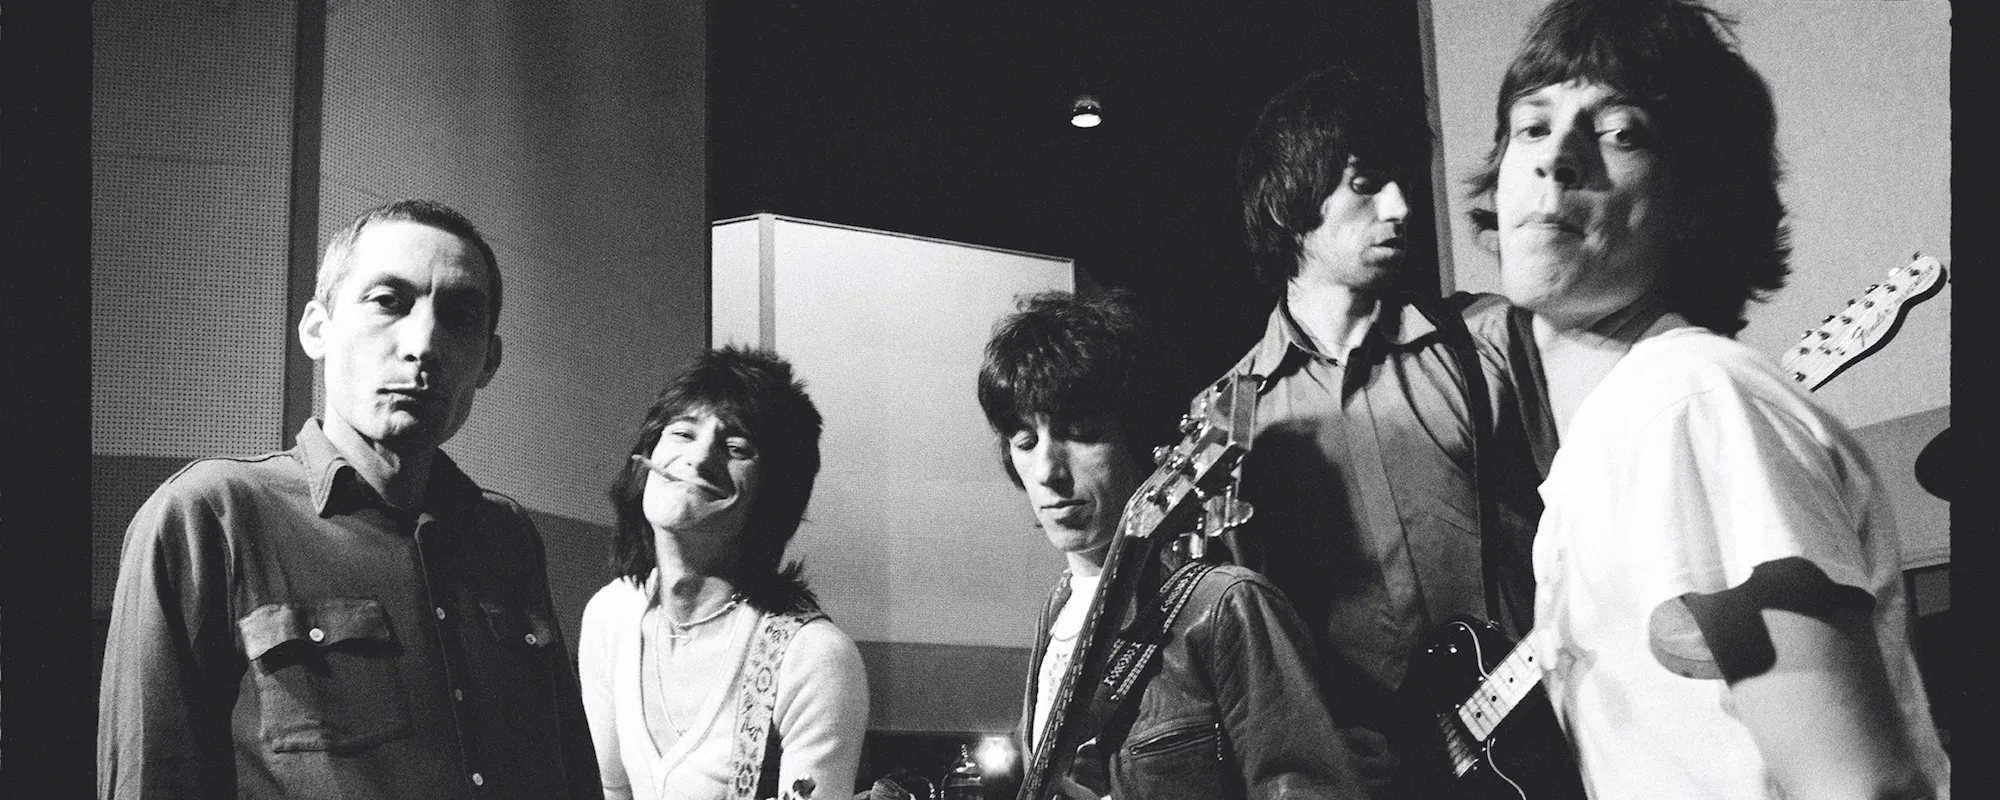 The Rolling Stones are pictured together in the beginning of their career.